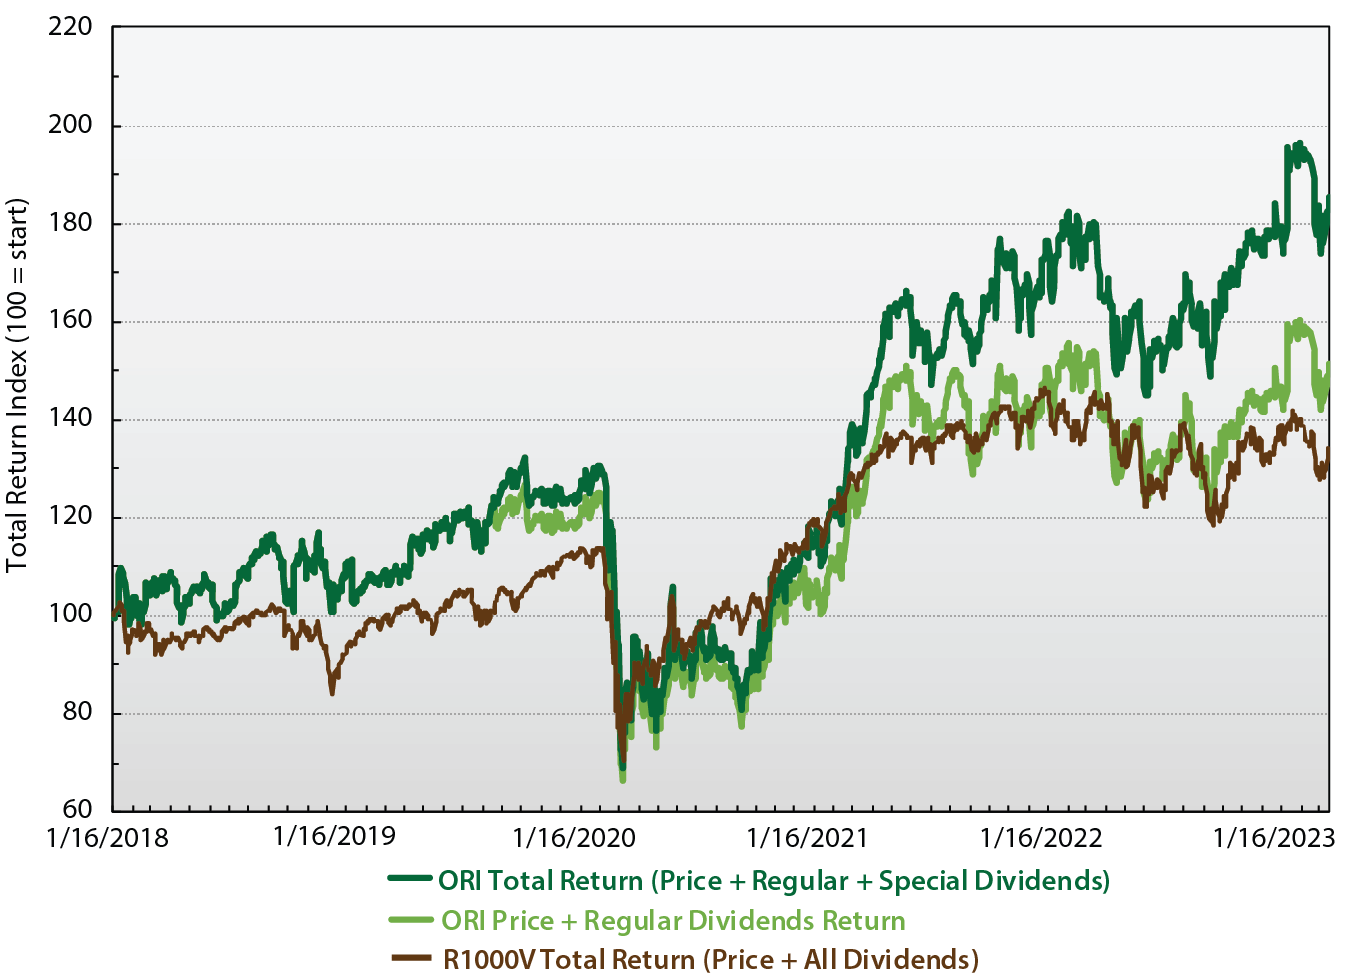 Total Return Study of Old Republic International Corp (ORI) and the Russell 1000 Value Index (R1000V)